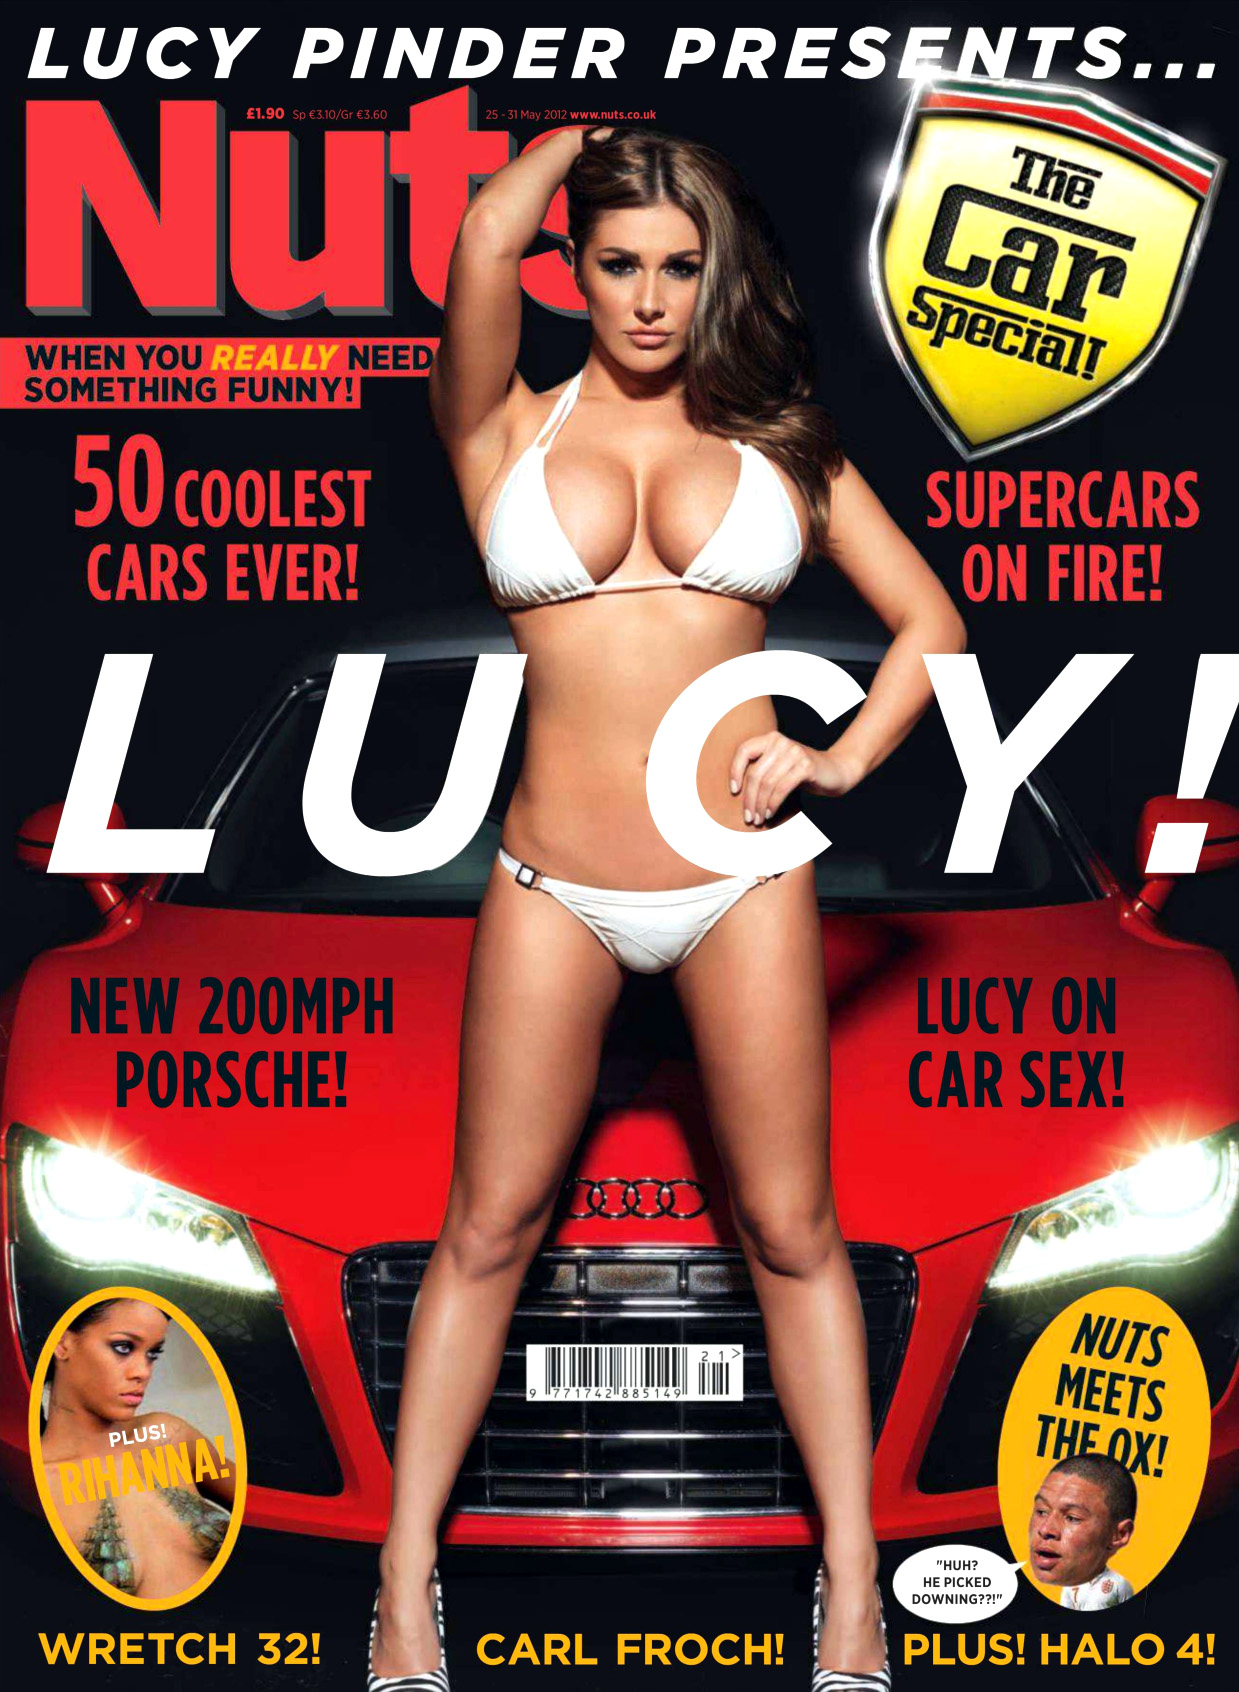 Lucy Pinder for Nuts Magazine “The Car Special” Your Daily Girl pic image